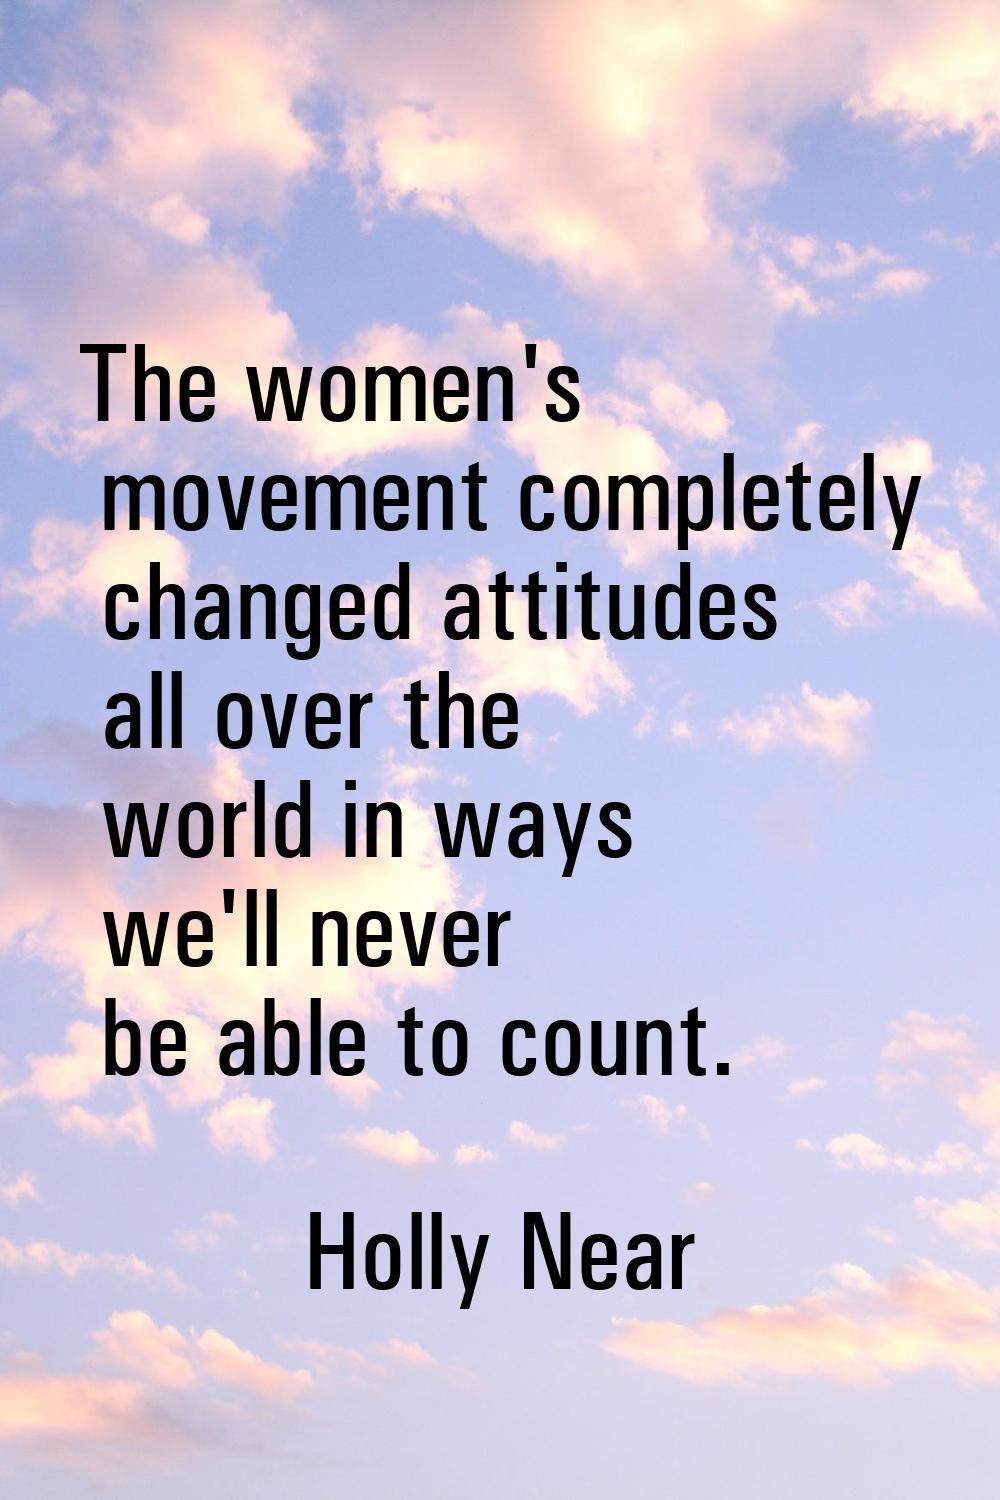 The women's movement completely changed attitudes all over the world in ways we'll never be able to